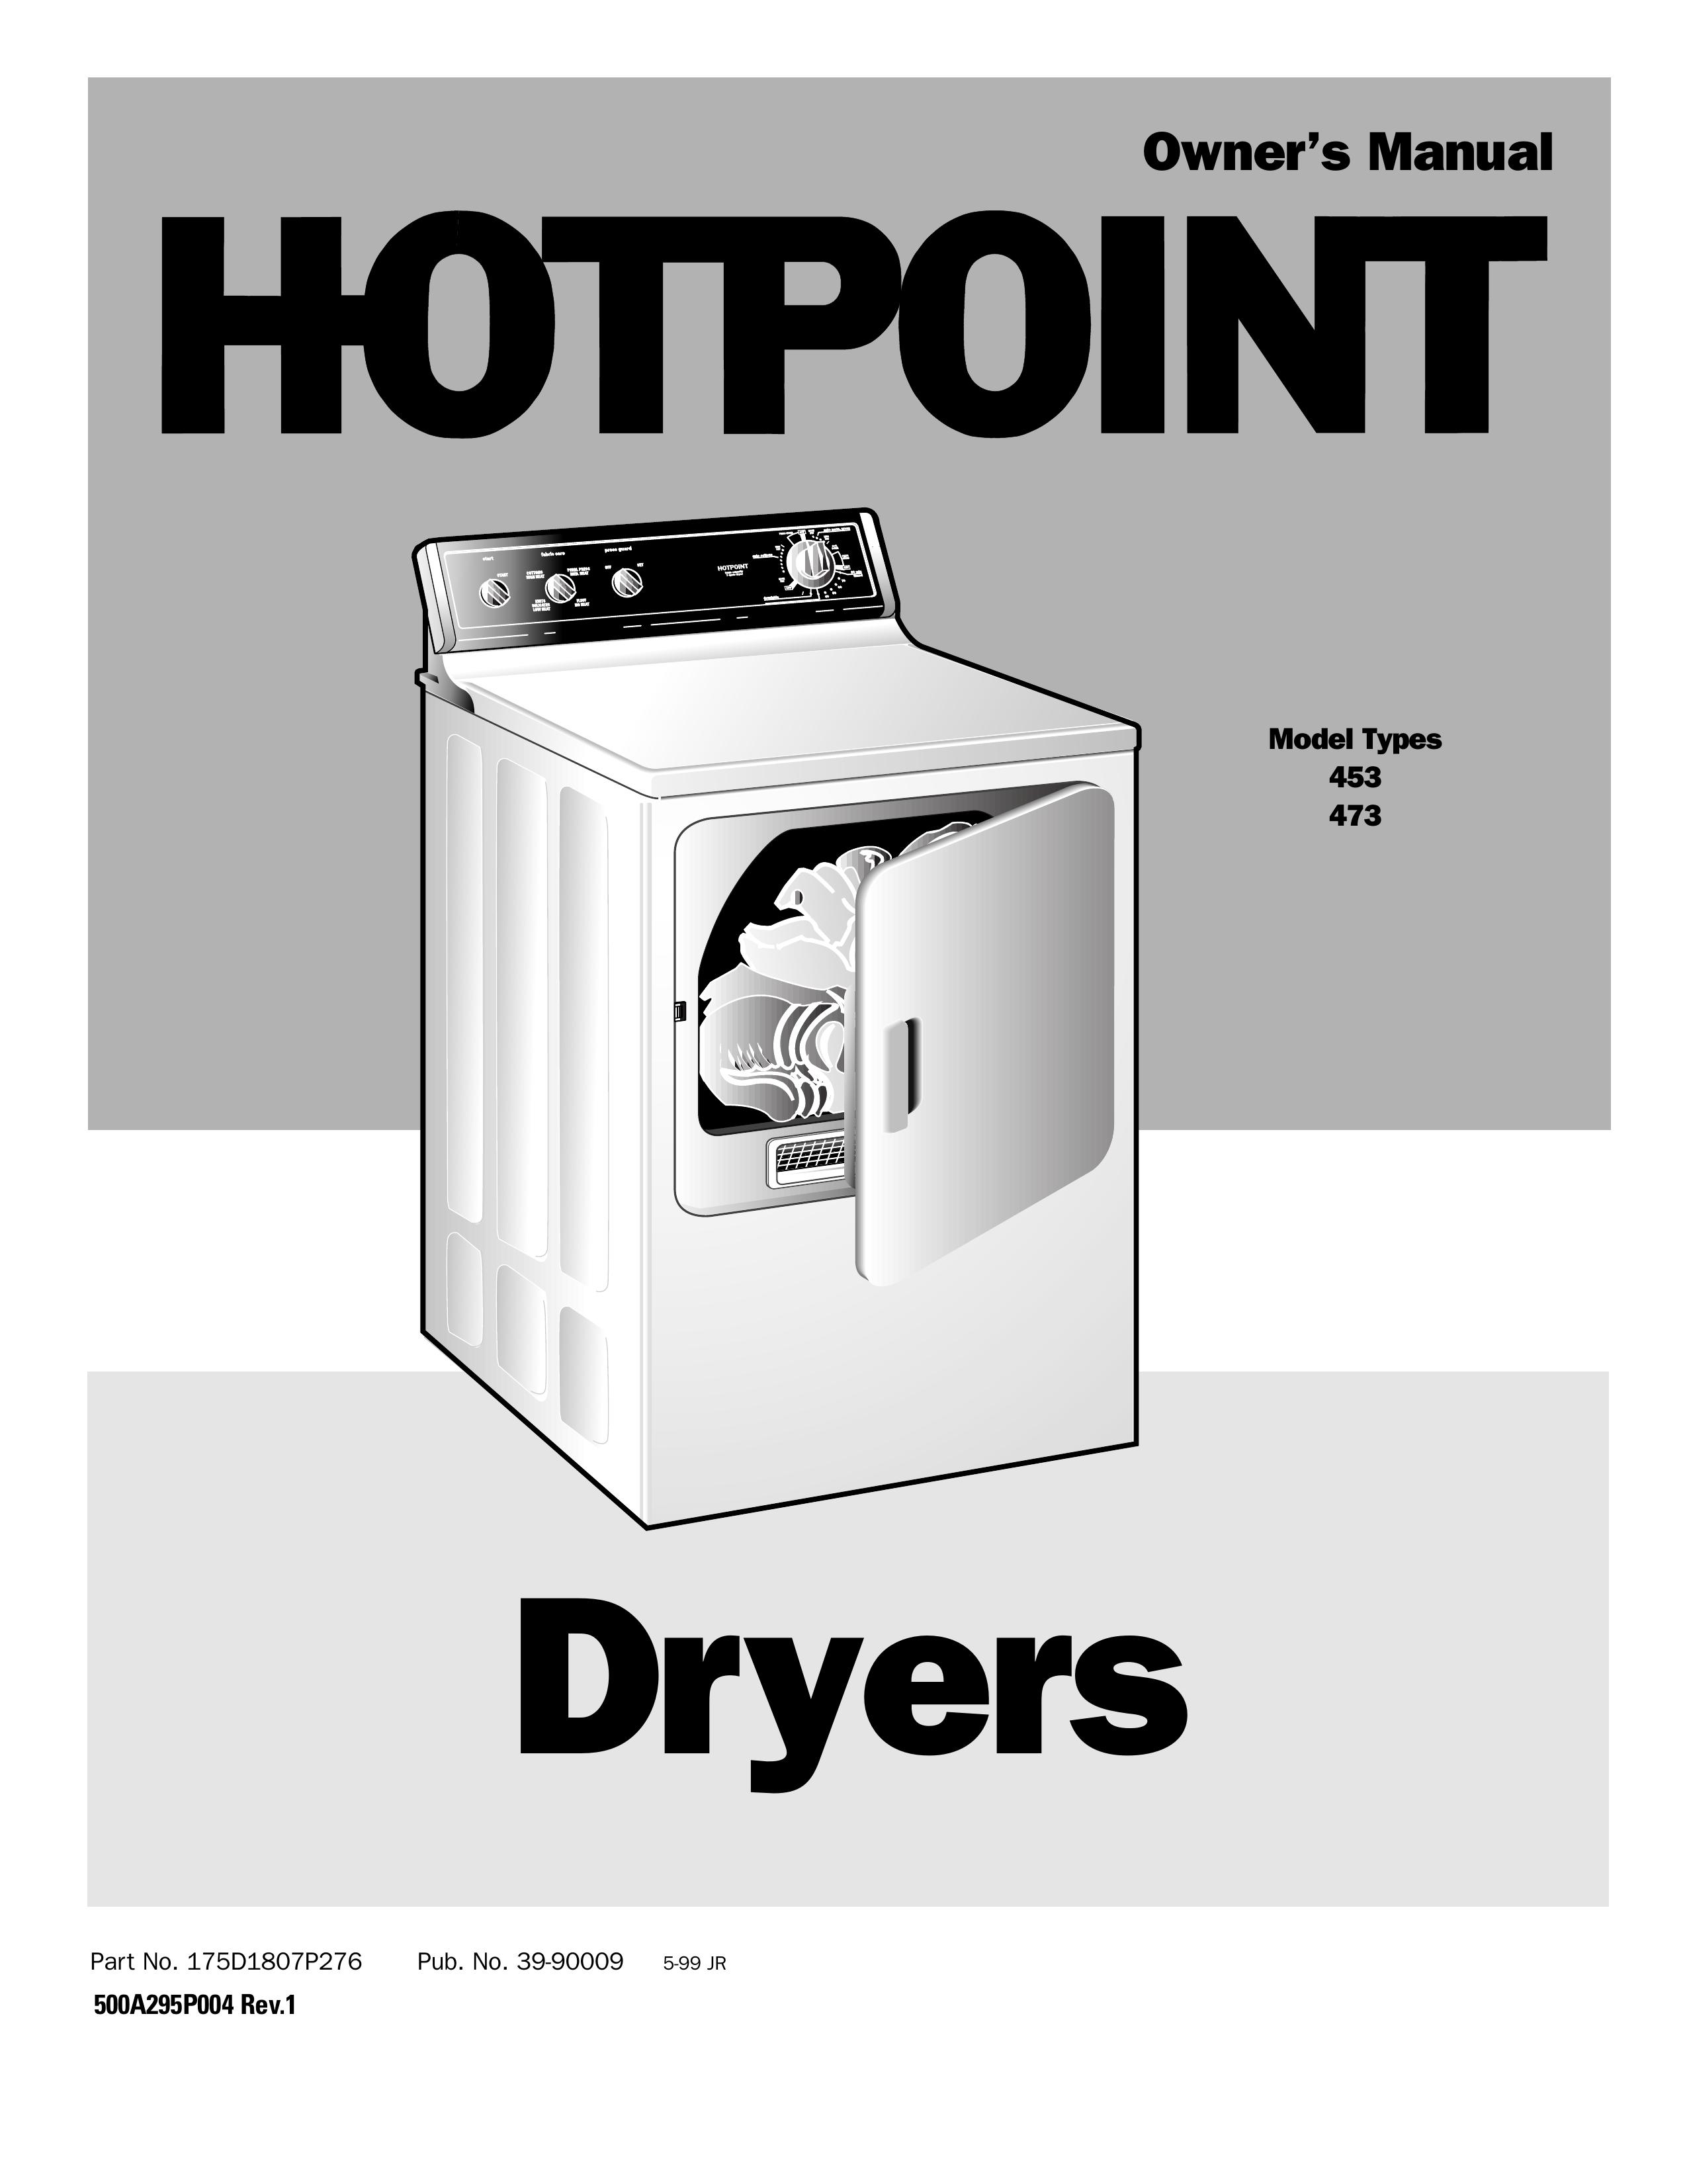 Hotpoint 453 Clothes Dryer User Manual